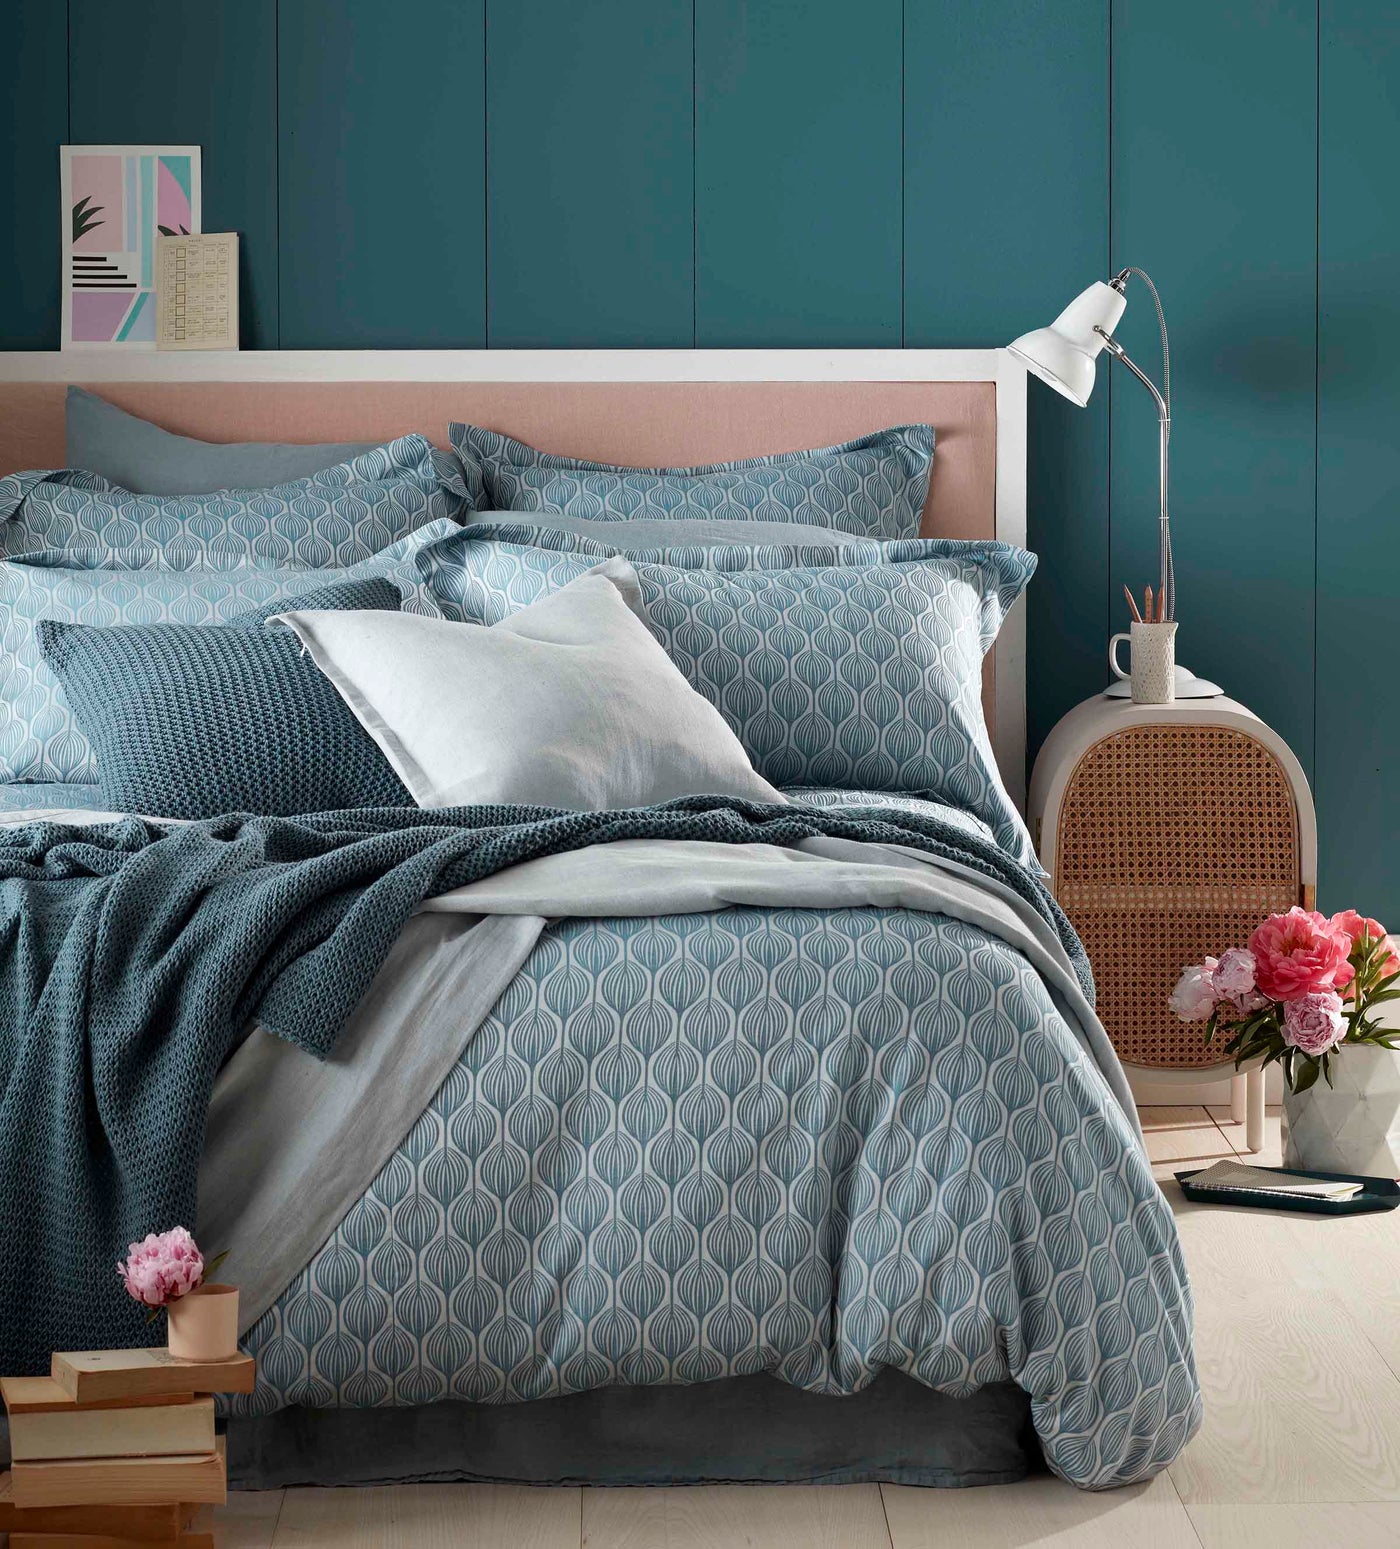 Teasels Teal Bedding with Teal Cushion Covers and Bed Throws